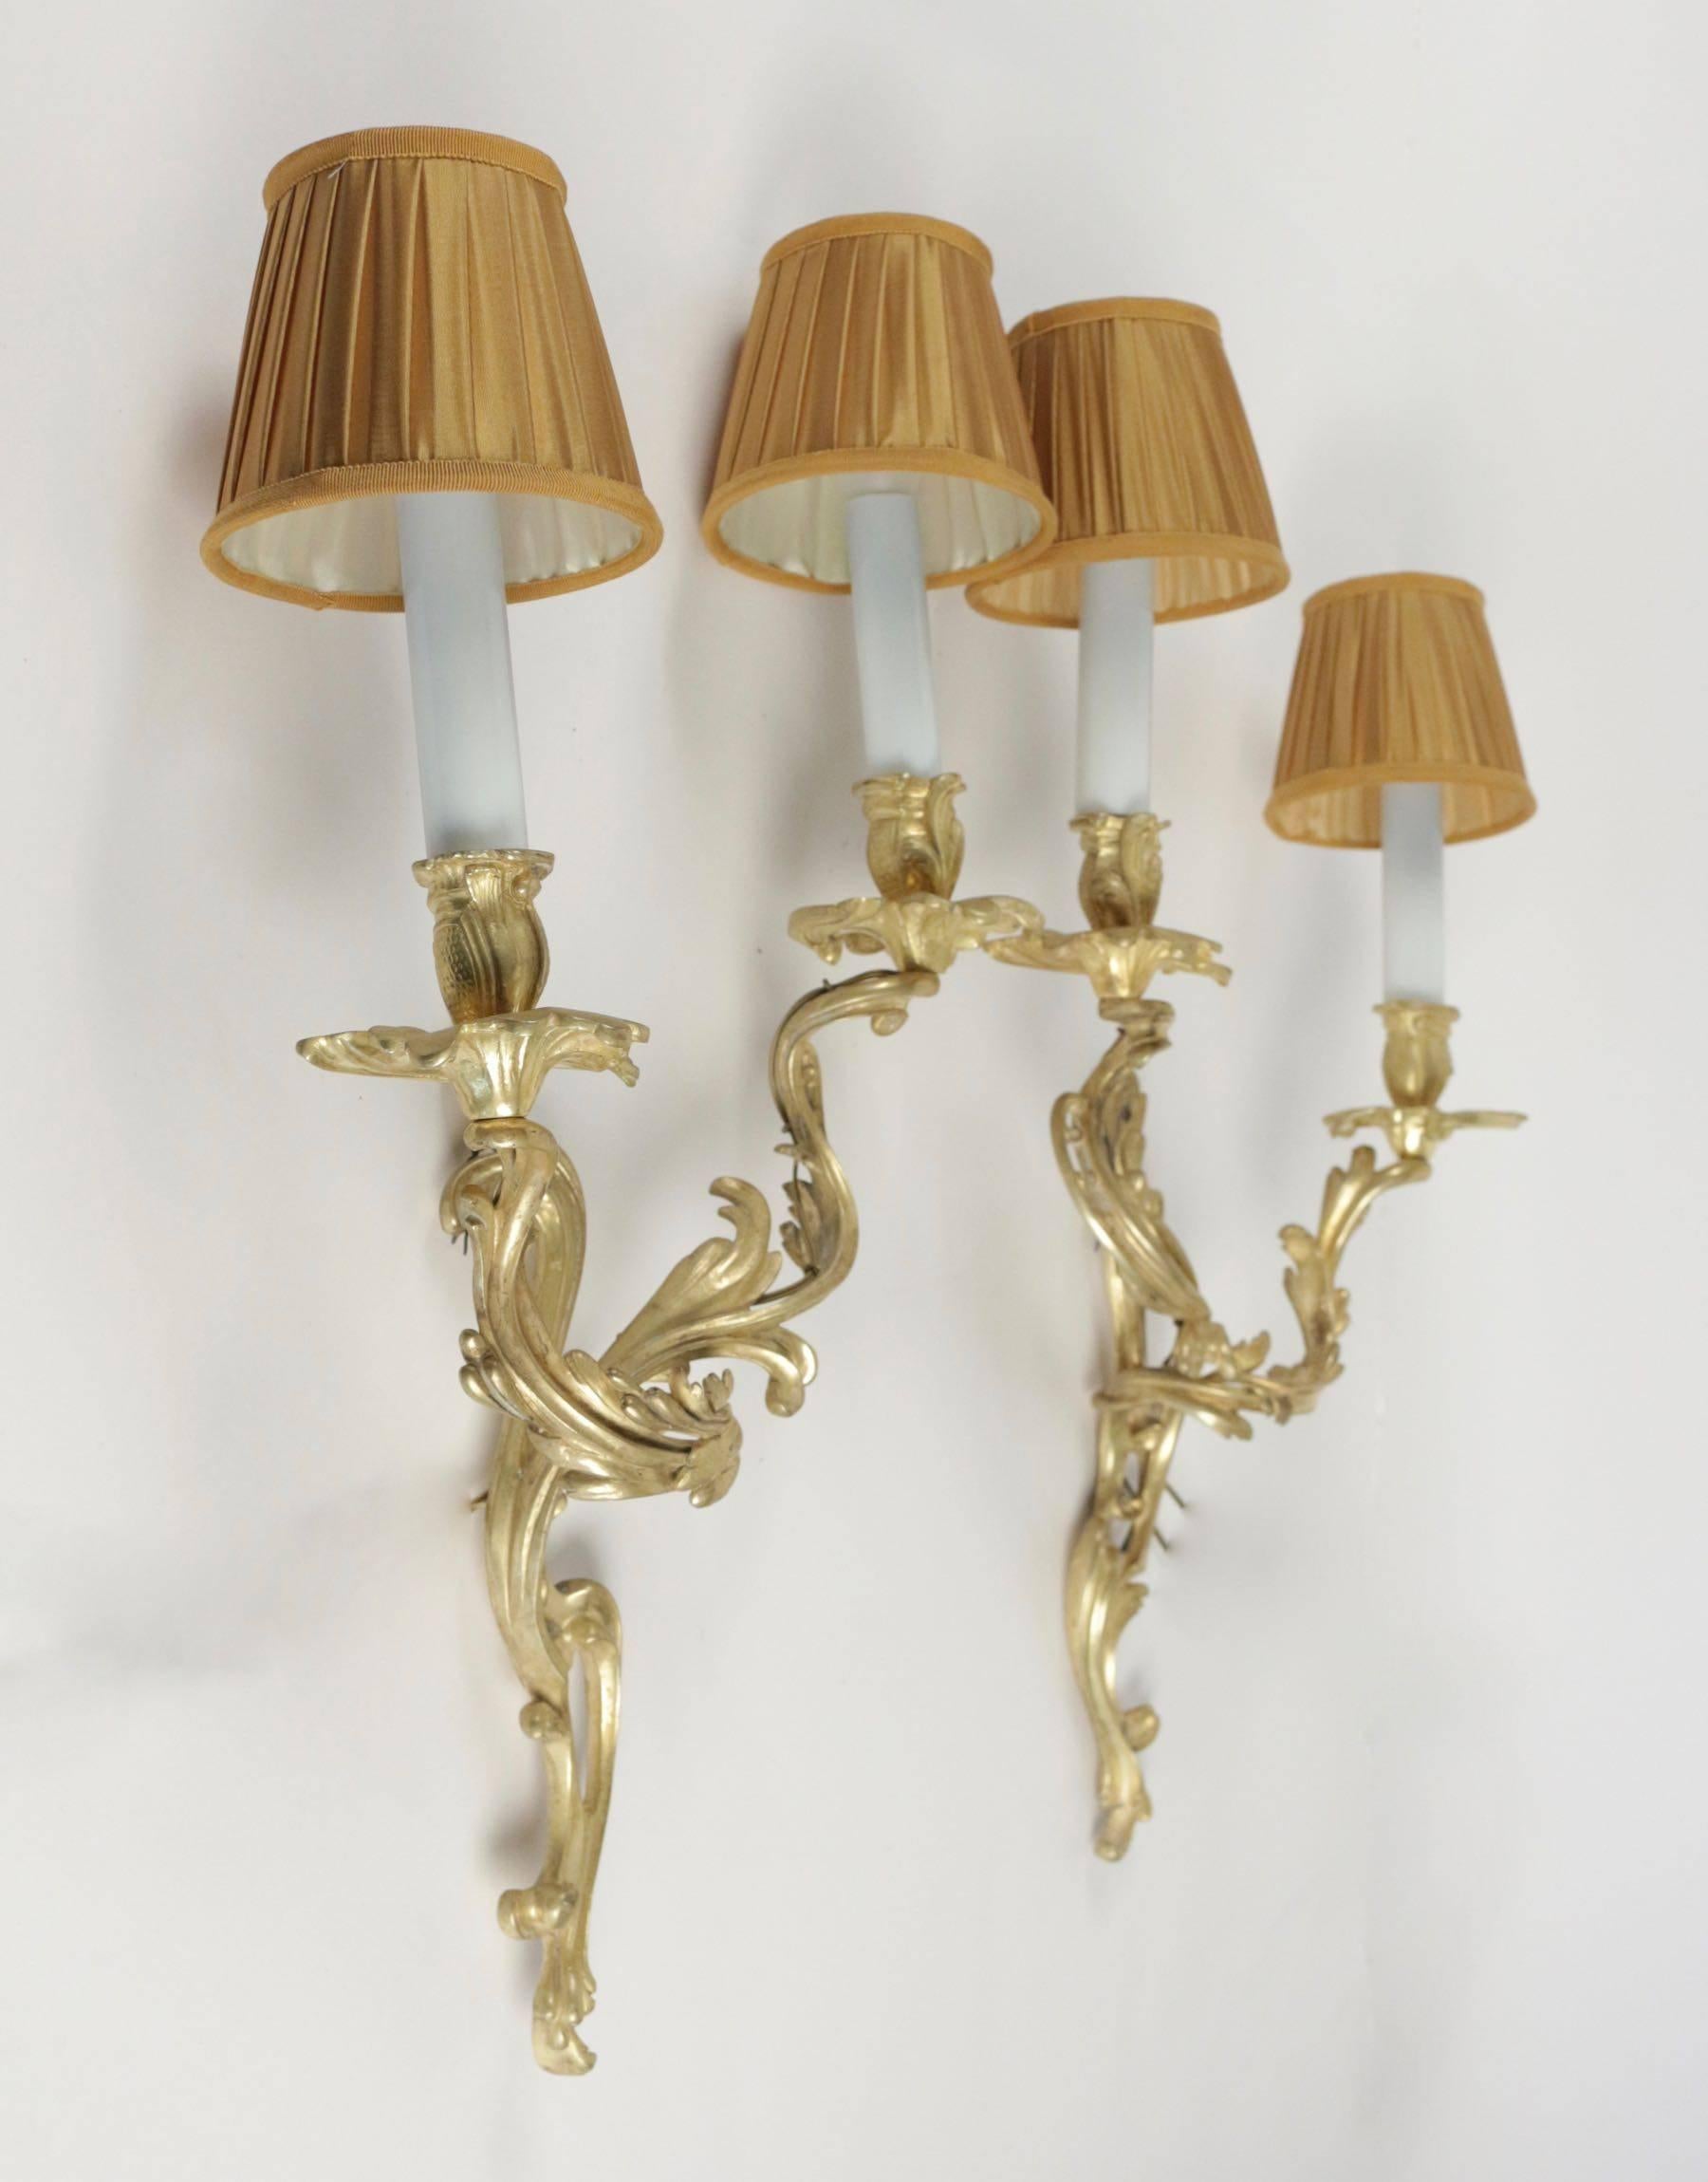 French Pair of Bronze Doré Sconces in the Style of Louis XV from the 19th Century